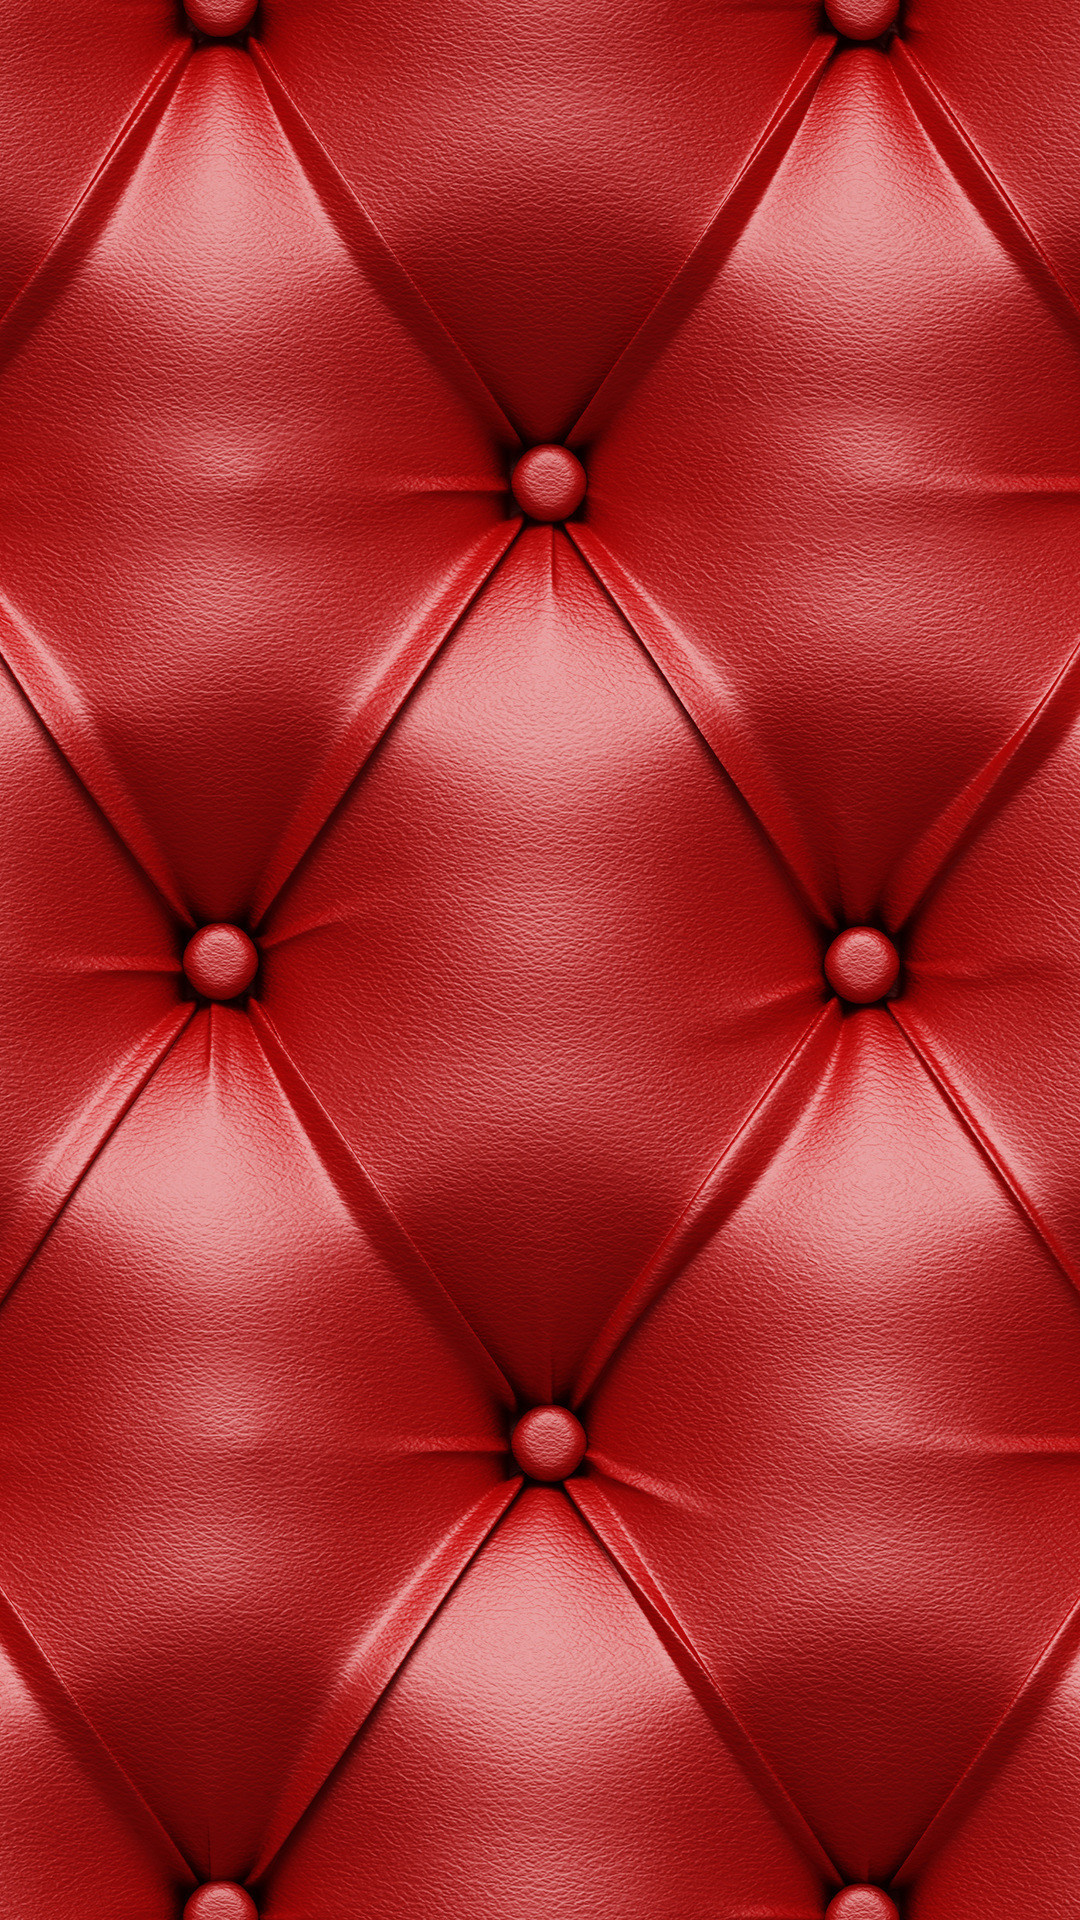 Red leather wallpapers, Popular choice, Stylish design, Eye-catching aesthetics, 1080x1920 Full HD Phone